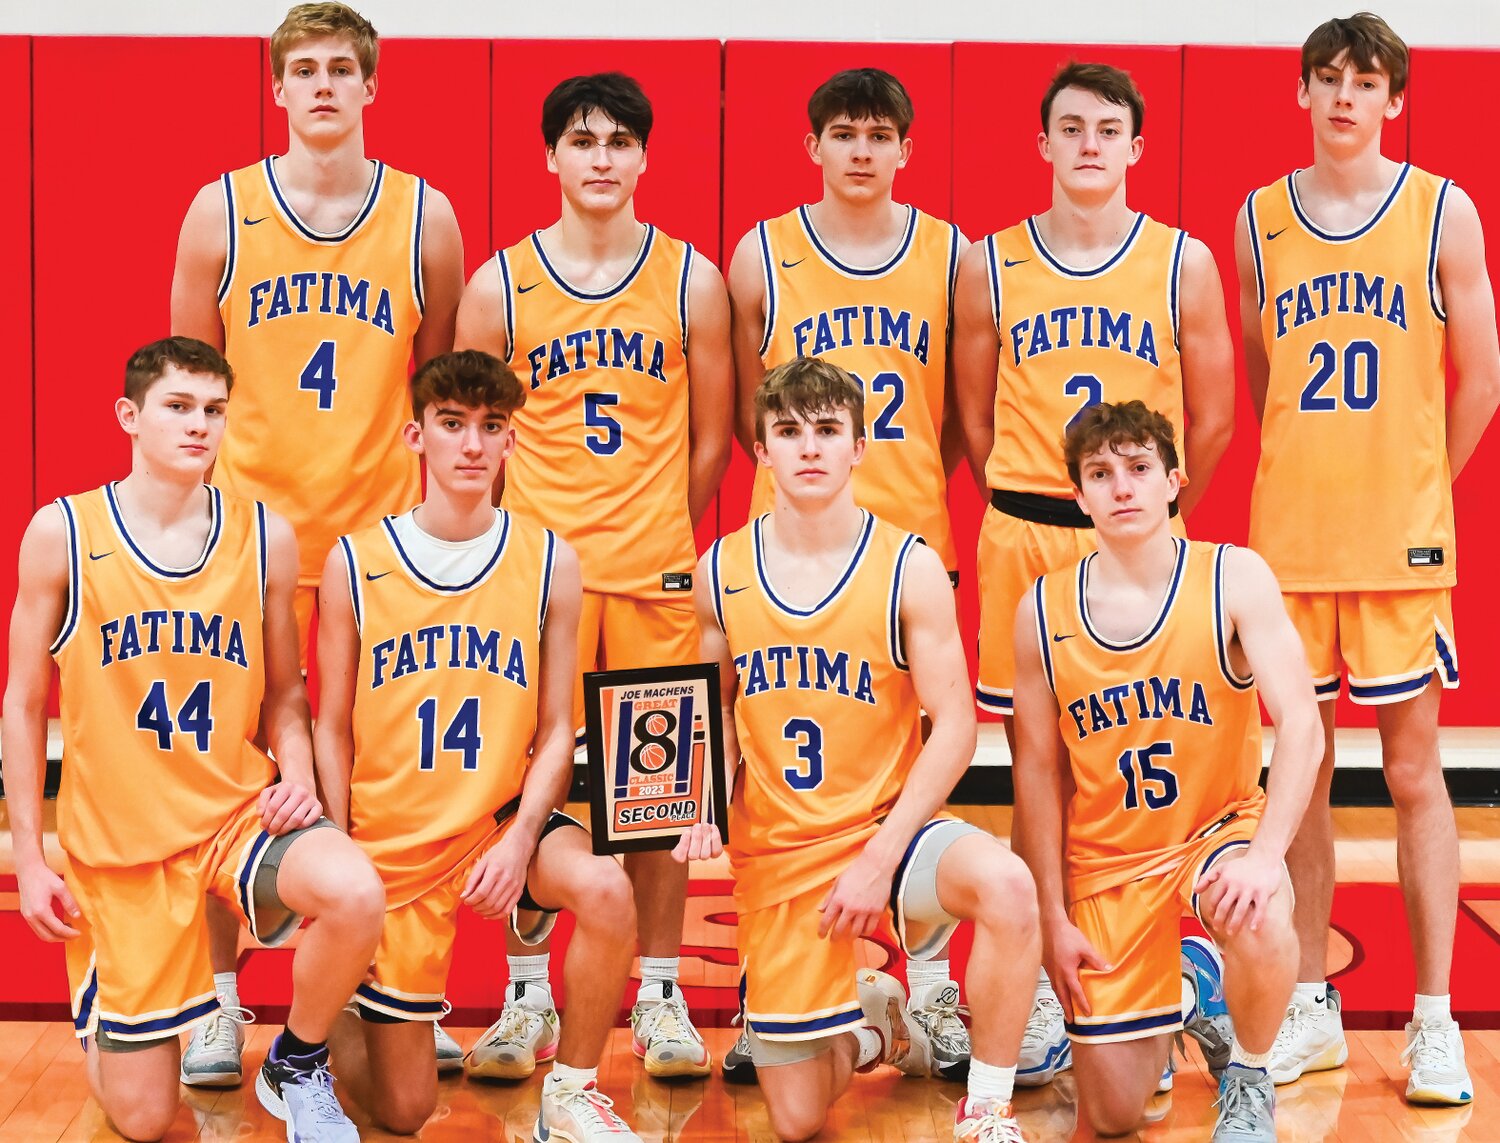 Fatima played to a second-place finish at last week’s Joe Machens Great 8 Classic in Jefferson City. Team members are, from left to right, front row, Jace Eisterhold, Sam Struemph, Max Stuecken, and Logan Kliethermes; and in the back row, Levi Robinson, Easton Haslag, Blake Kliethermes, Matthew Robertson, and Xavier Stuecken.